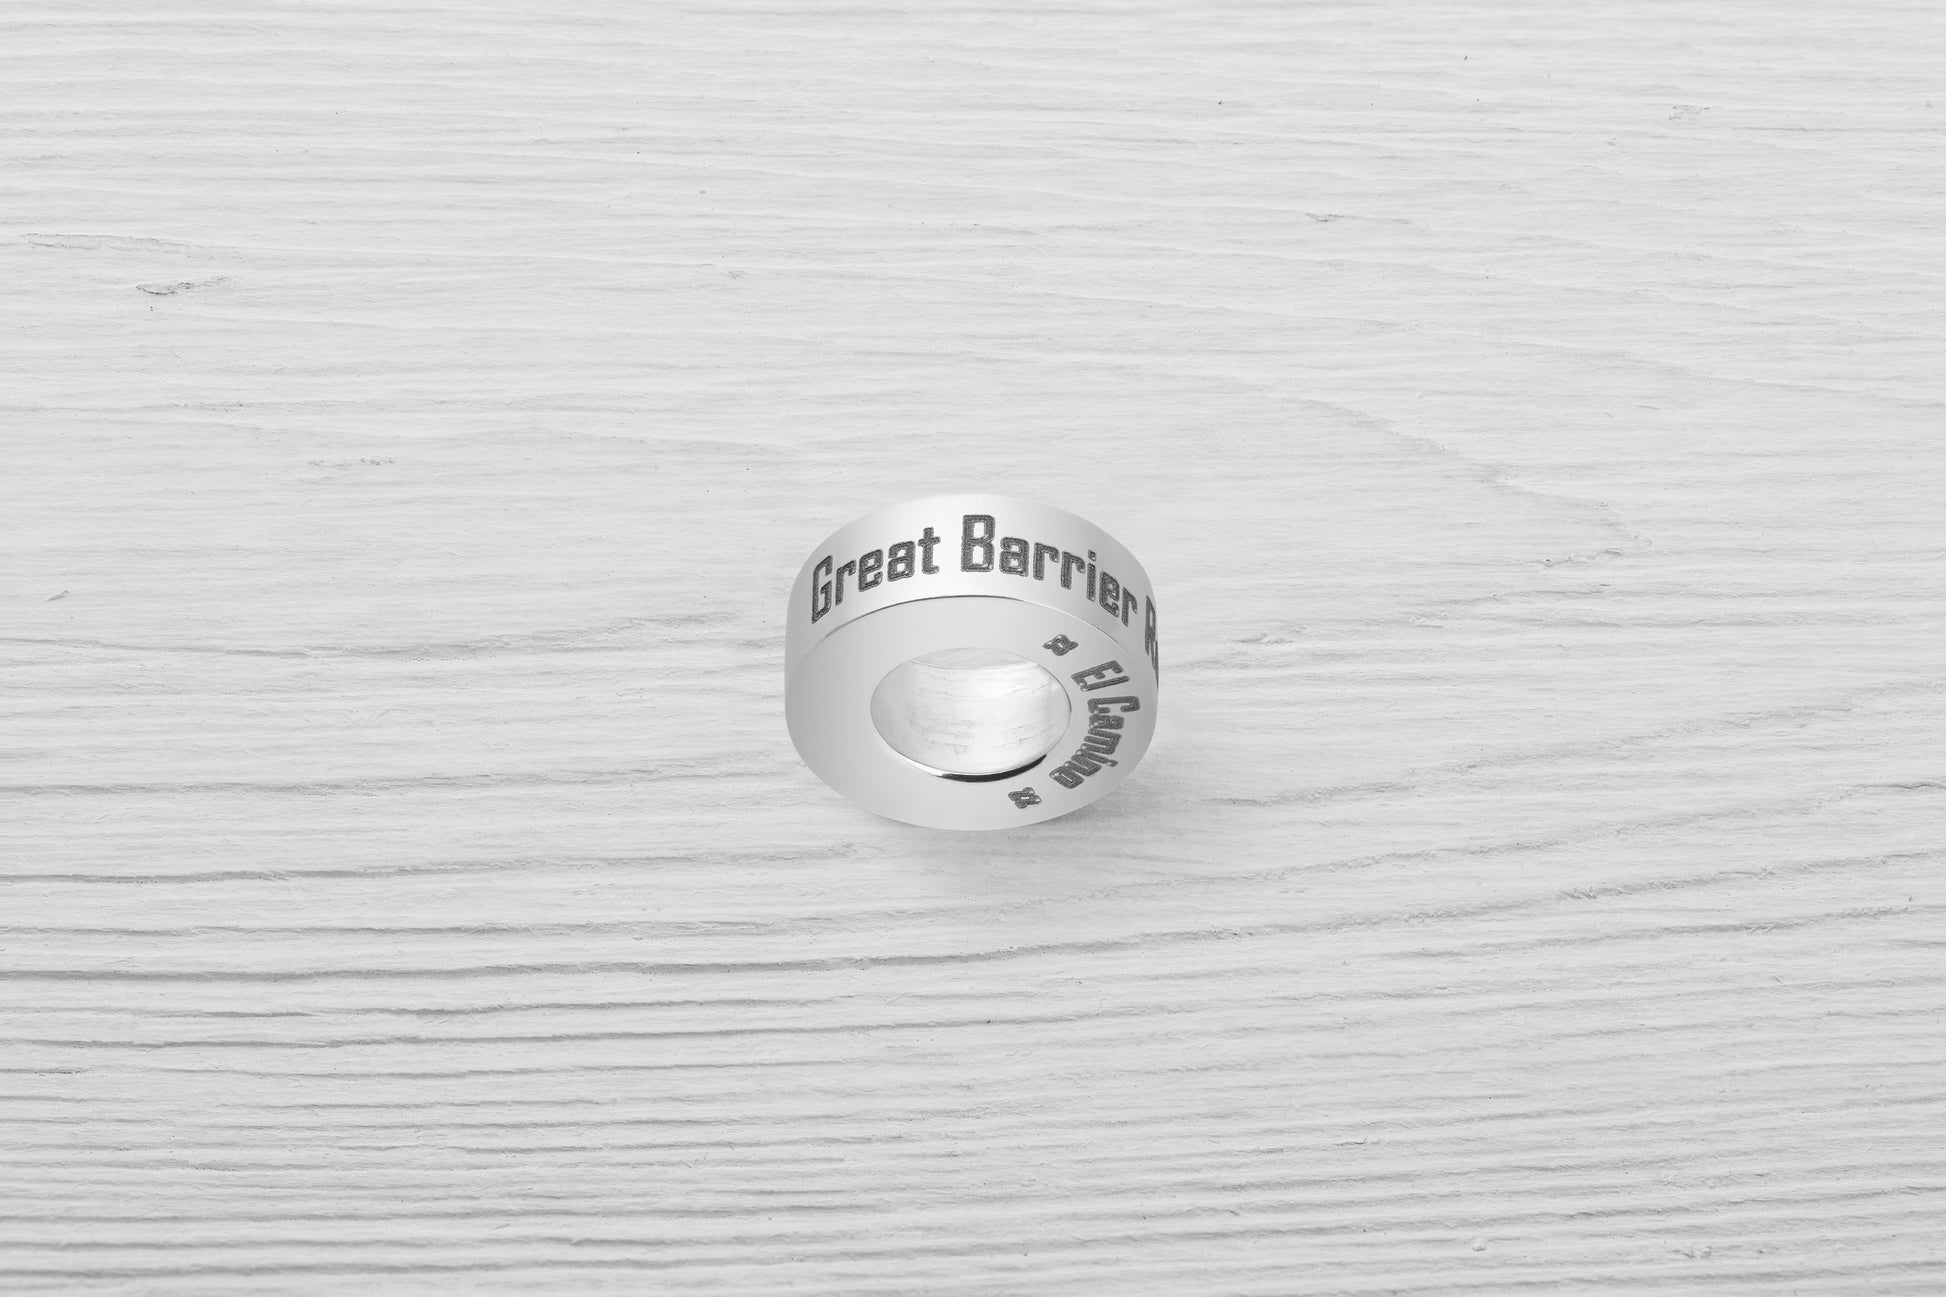 Great Barrier Reef El Camino Small Step Travel Charm Bead